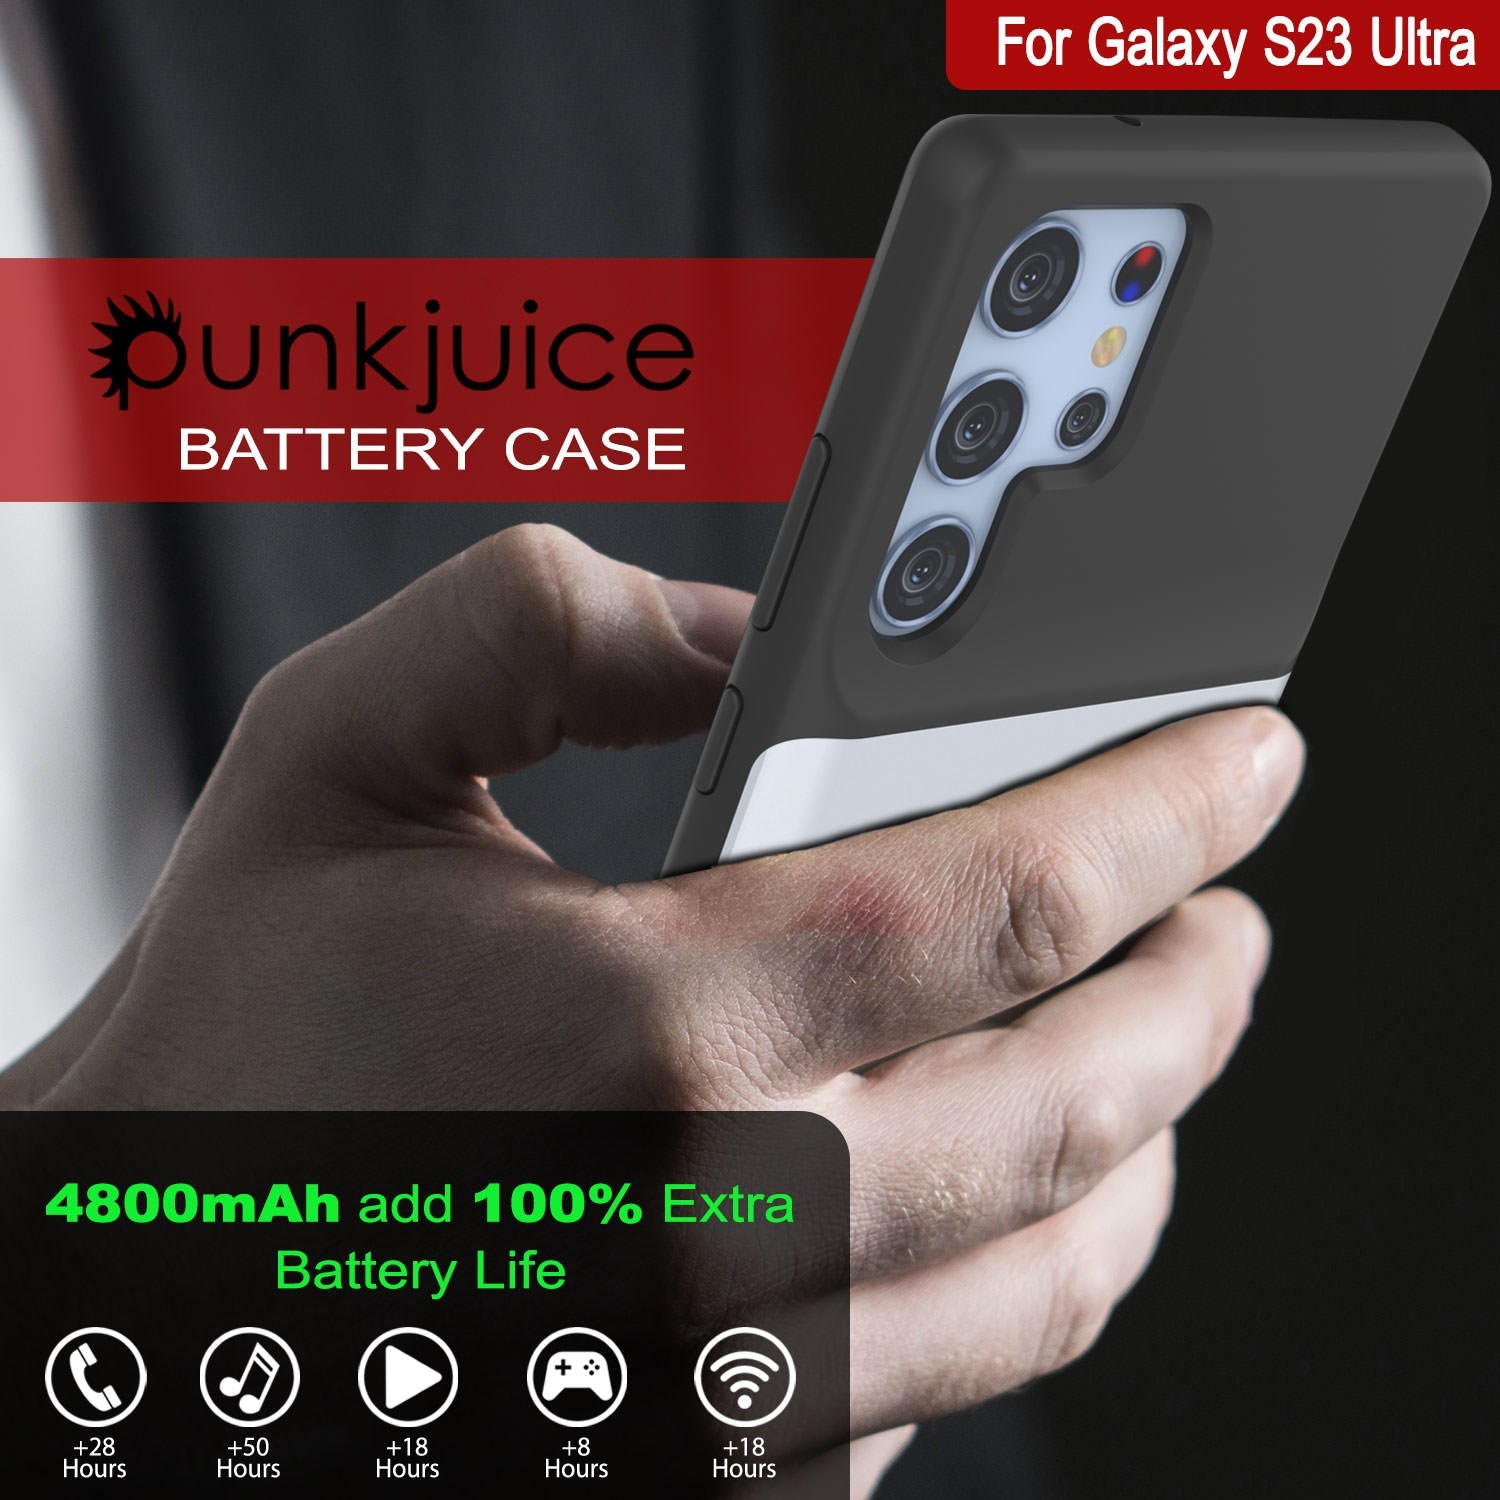 PunkJuice S24 Ultra Battery Case White - Portable Charging Power Juice Bank with 4500mAh